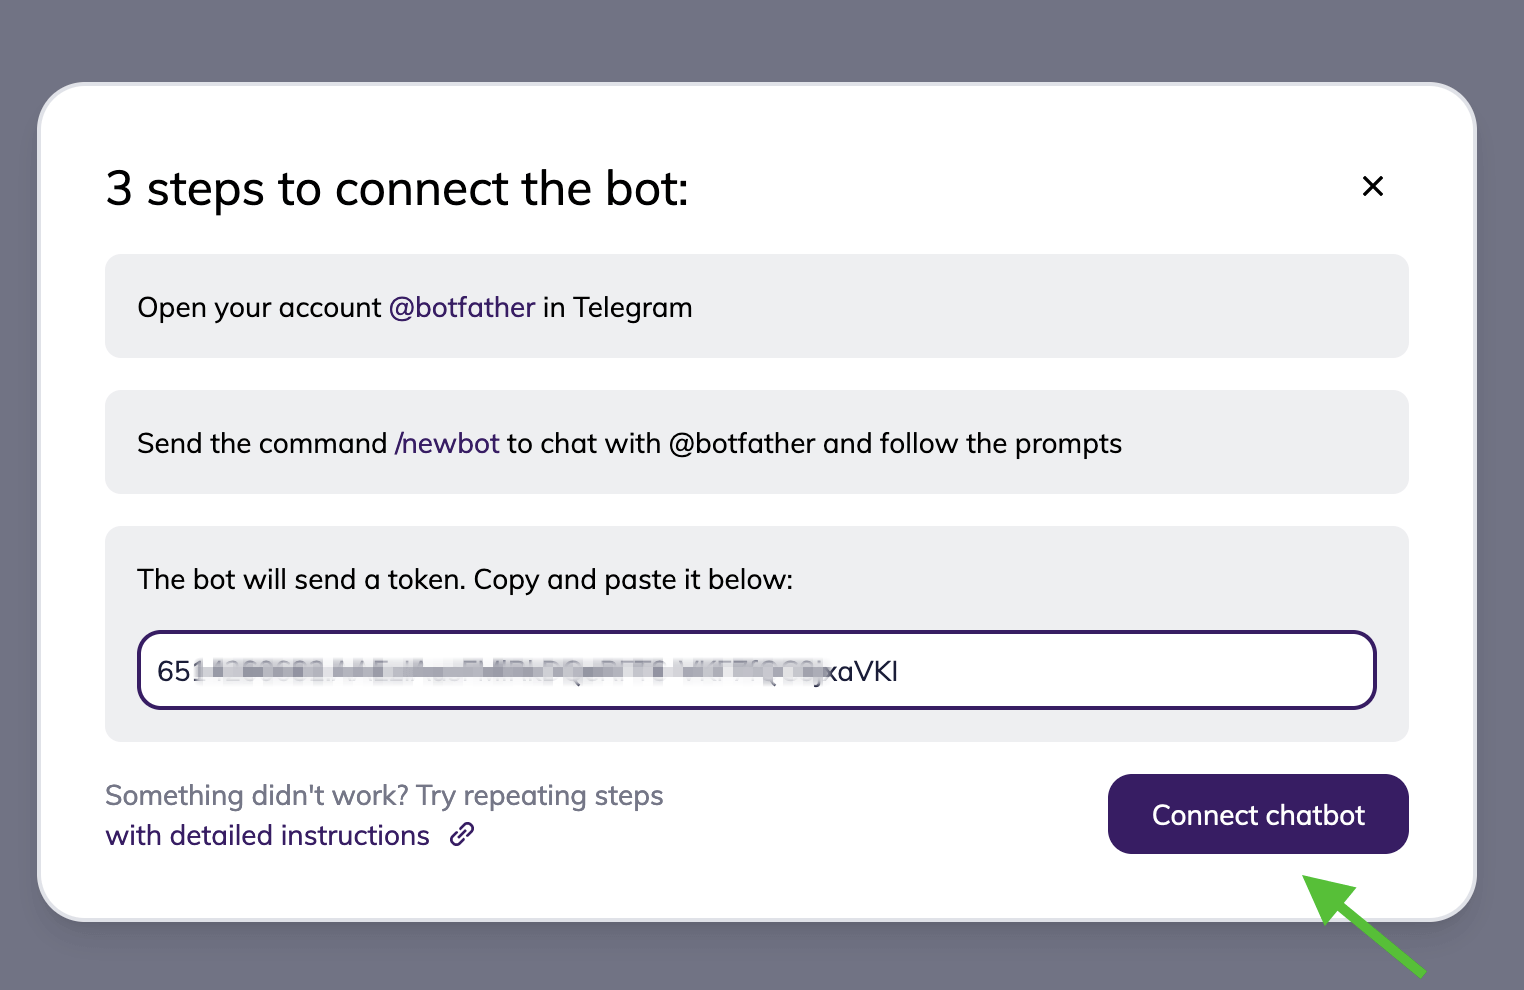 In the merge window, input the token into a white field to connect the chatbot to the Selzy platform